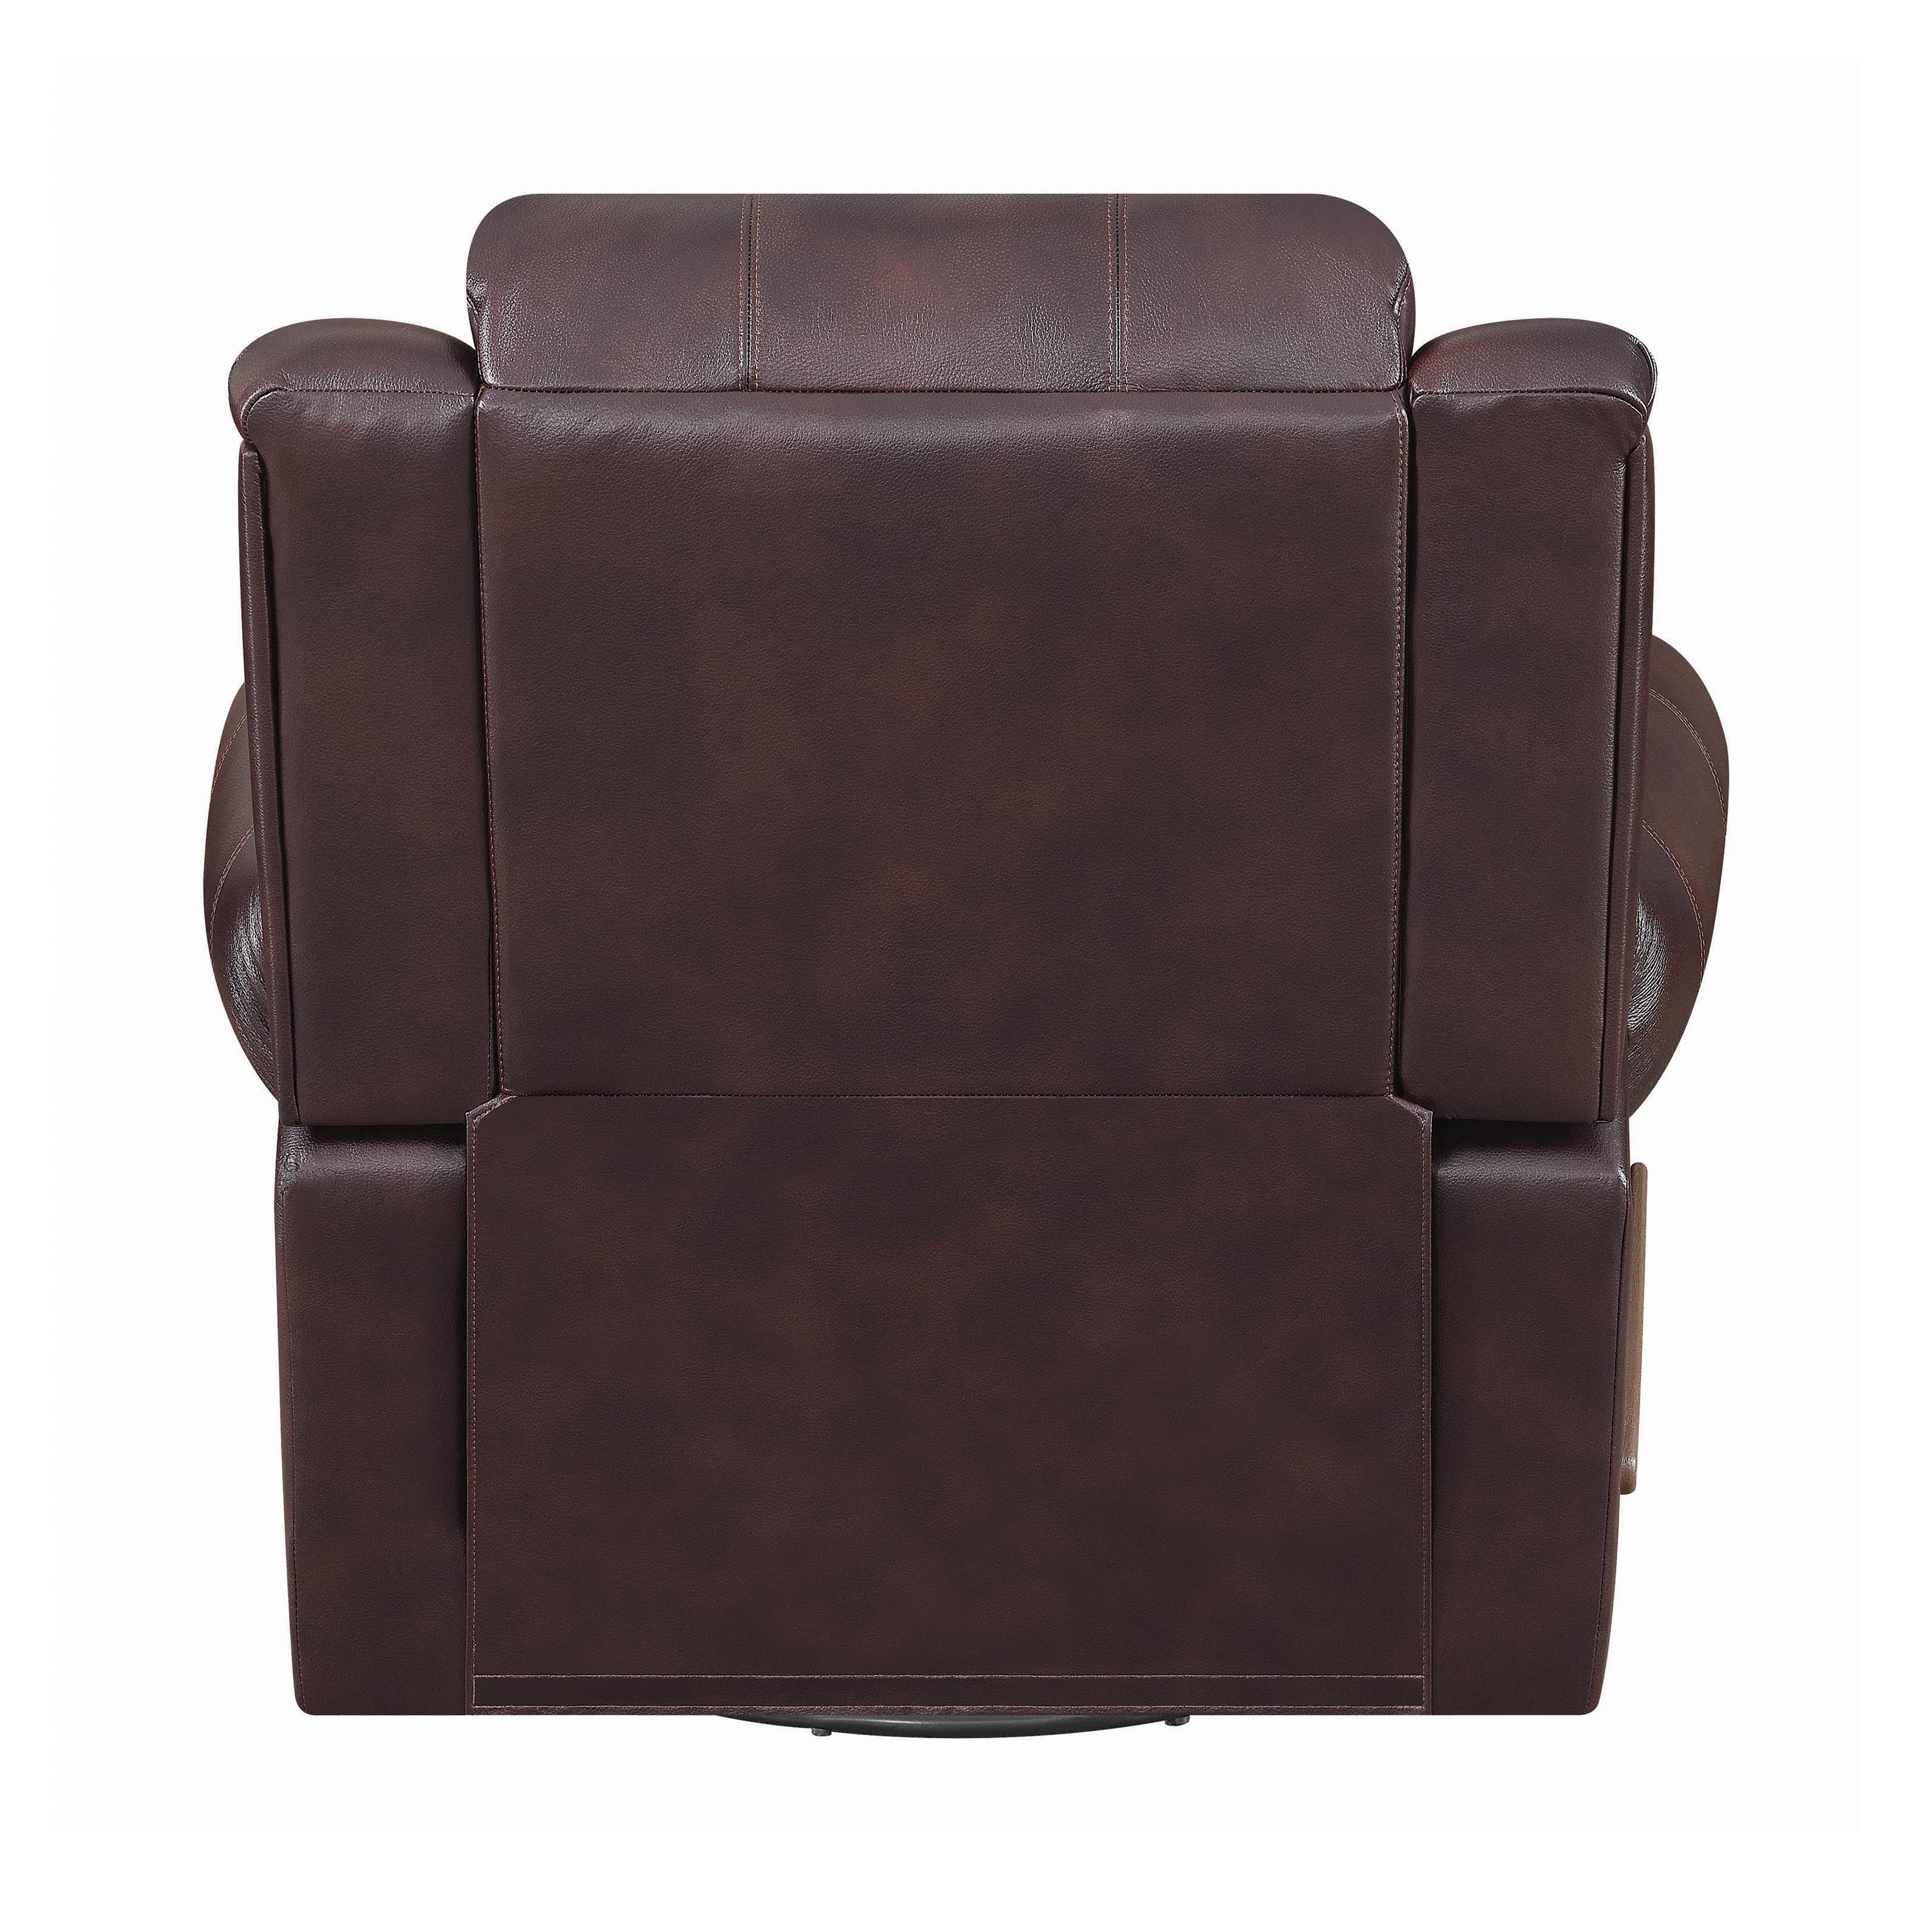 

    
650161-S3 Traditional Dark Brown Leather Living Room Set 3pcs Coaster 650161-S3 Sir Rawlinson
